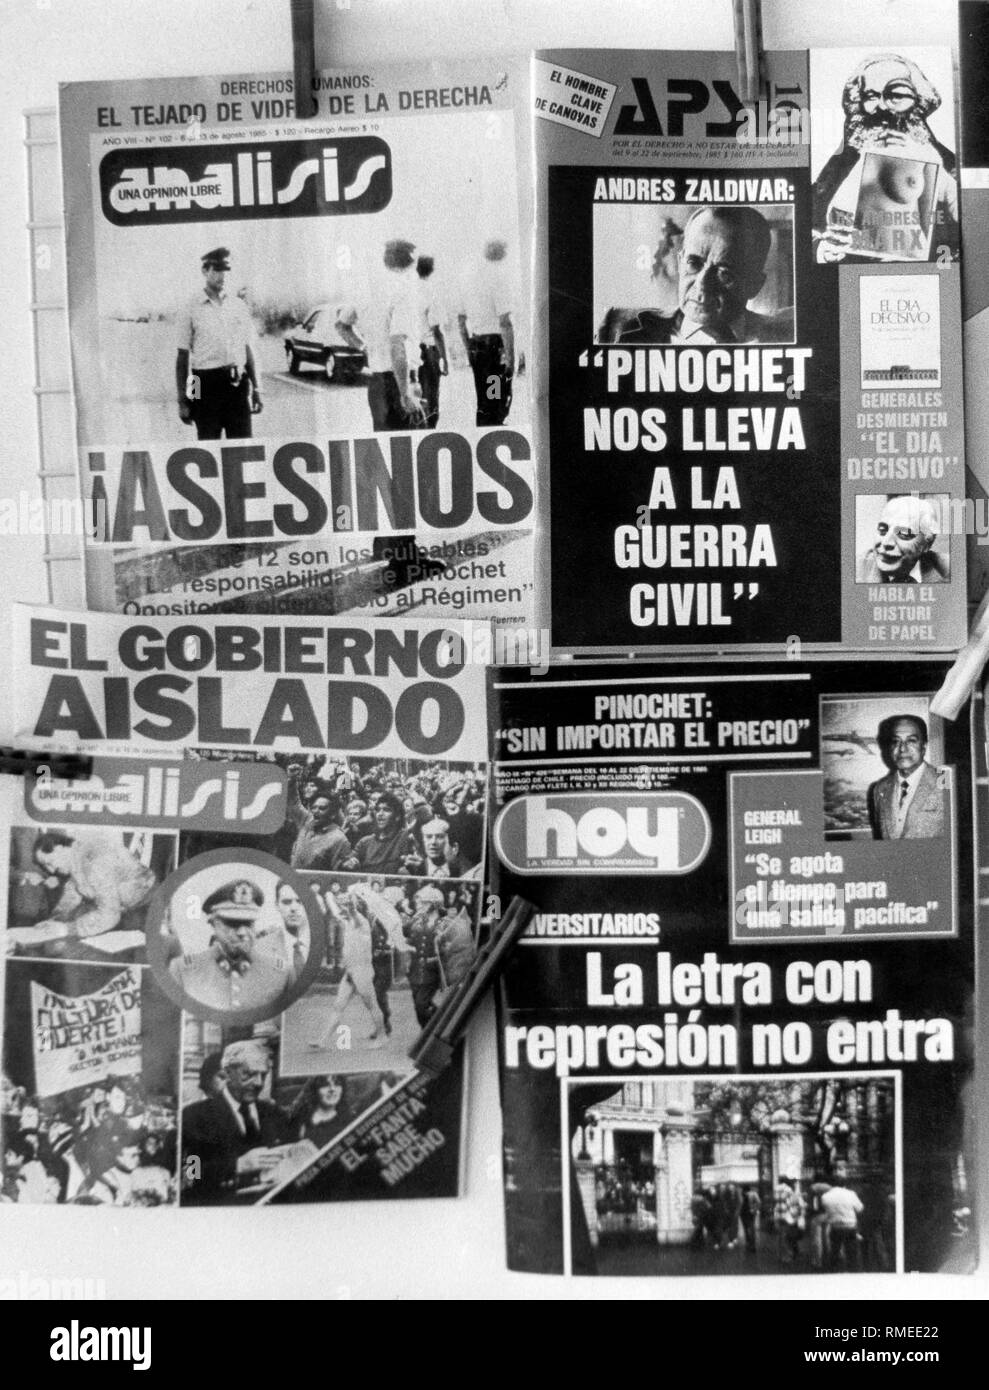 Political journals in Santiago de Chile: Zaldivar: 'Pinochet leads us into civil war', Analisis: 'Murderer' to the accused policemen' and 'El Gobierno Aislado' (the government is isolated). Stock Photo